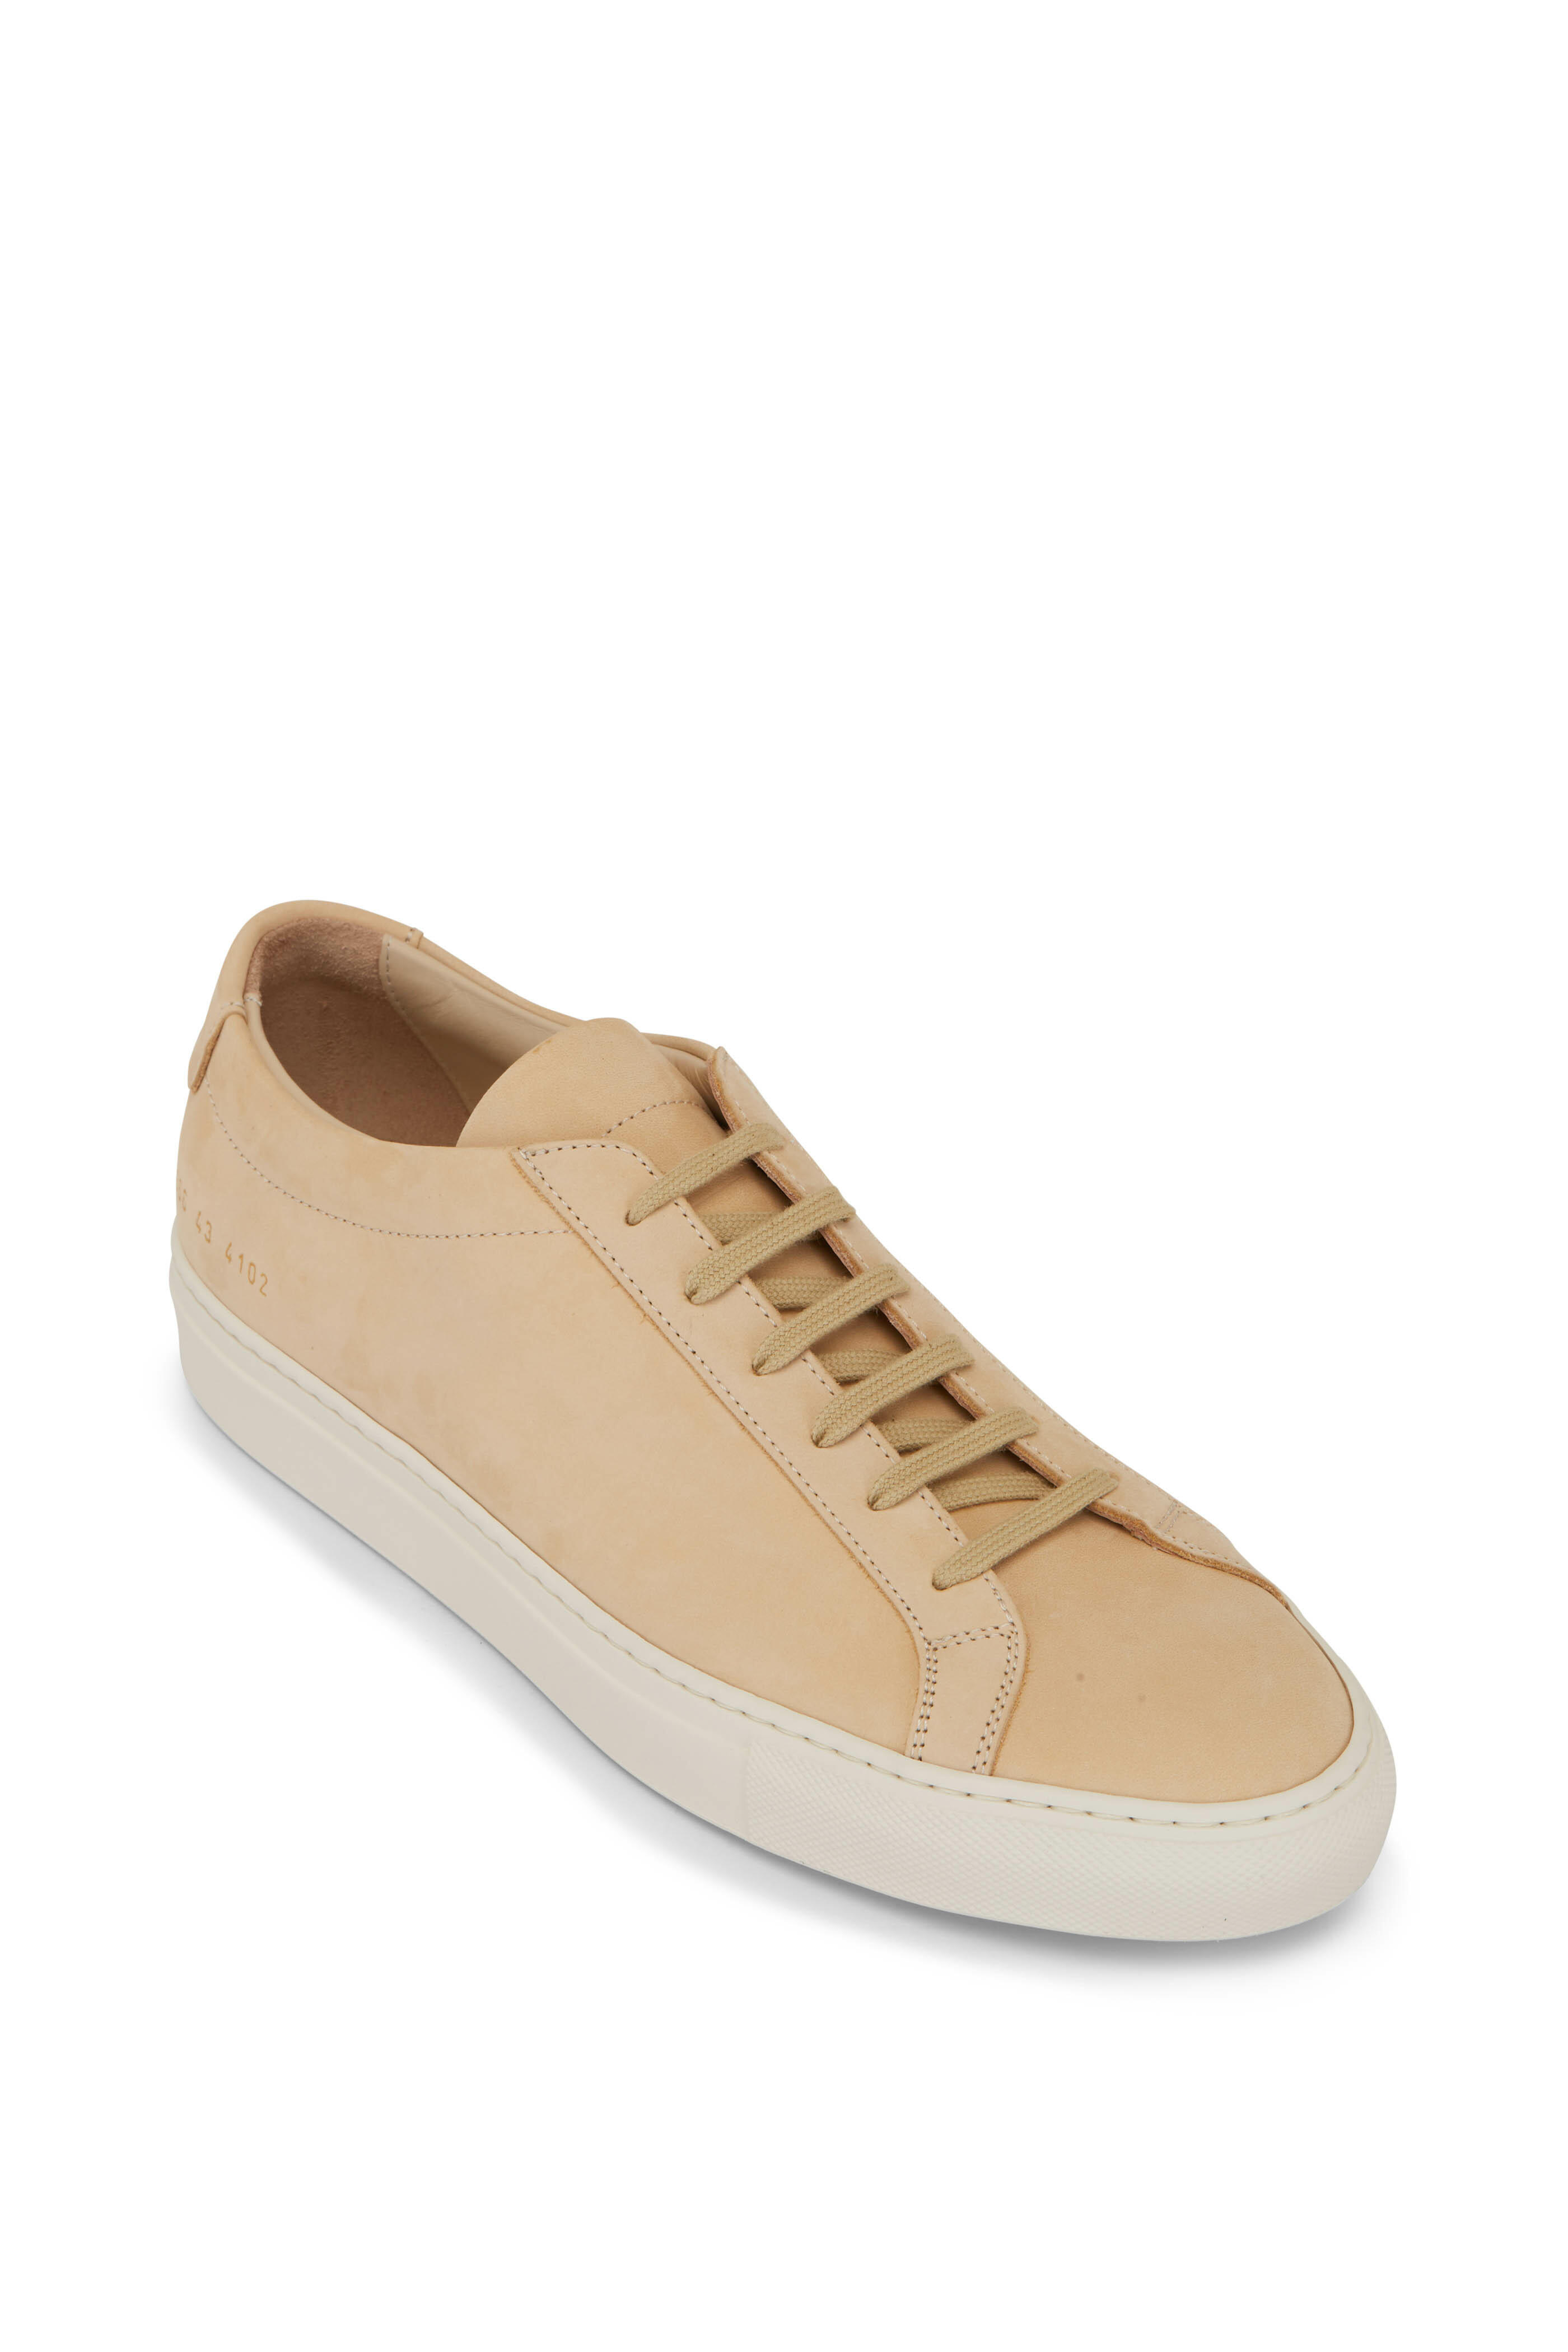 Common - Achilles Off White Leather Low Top Sneaker